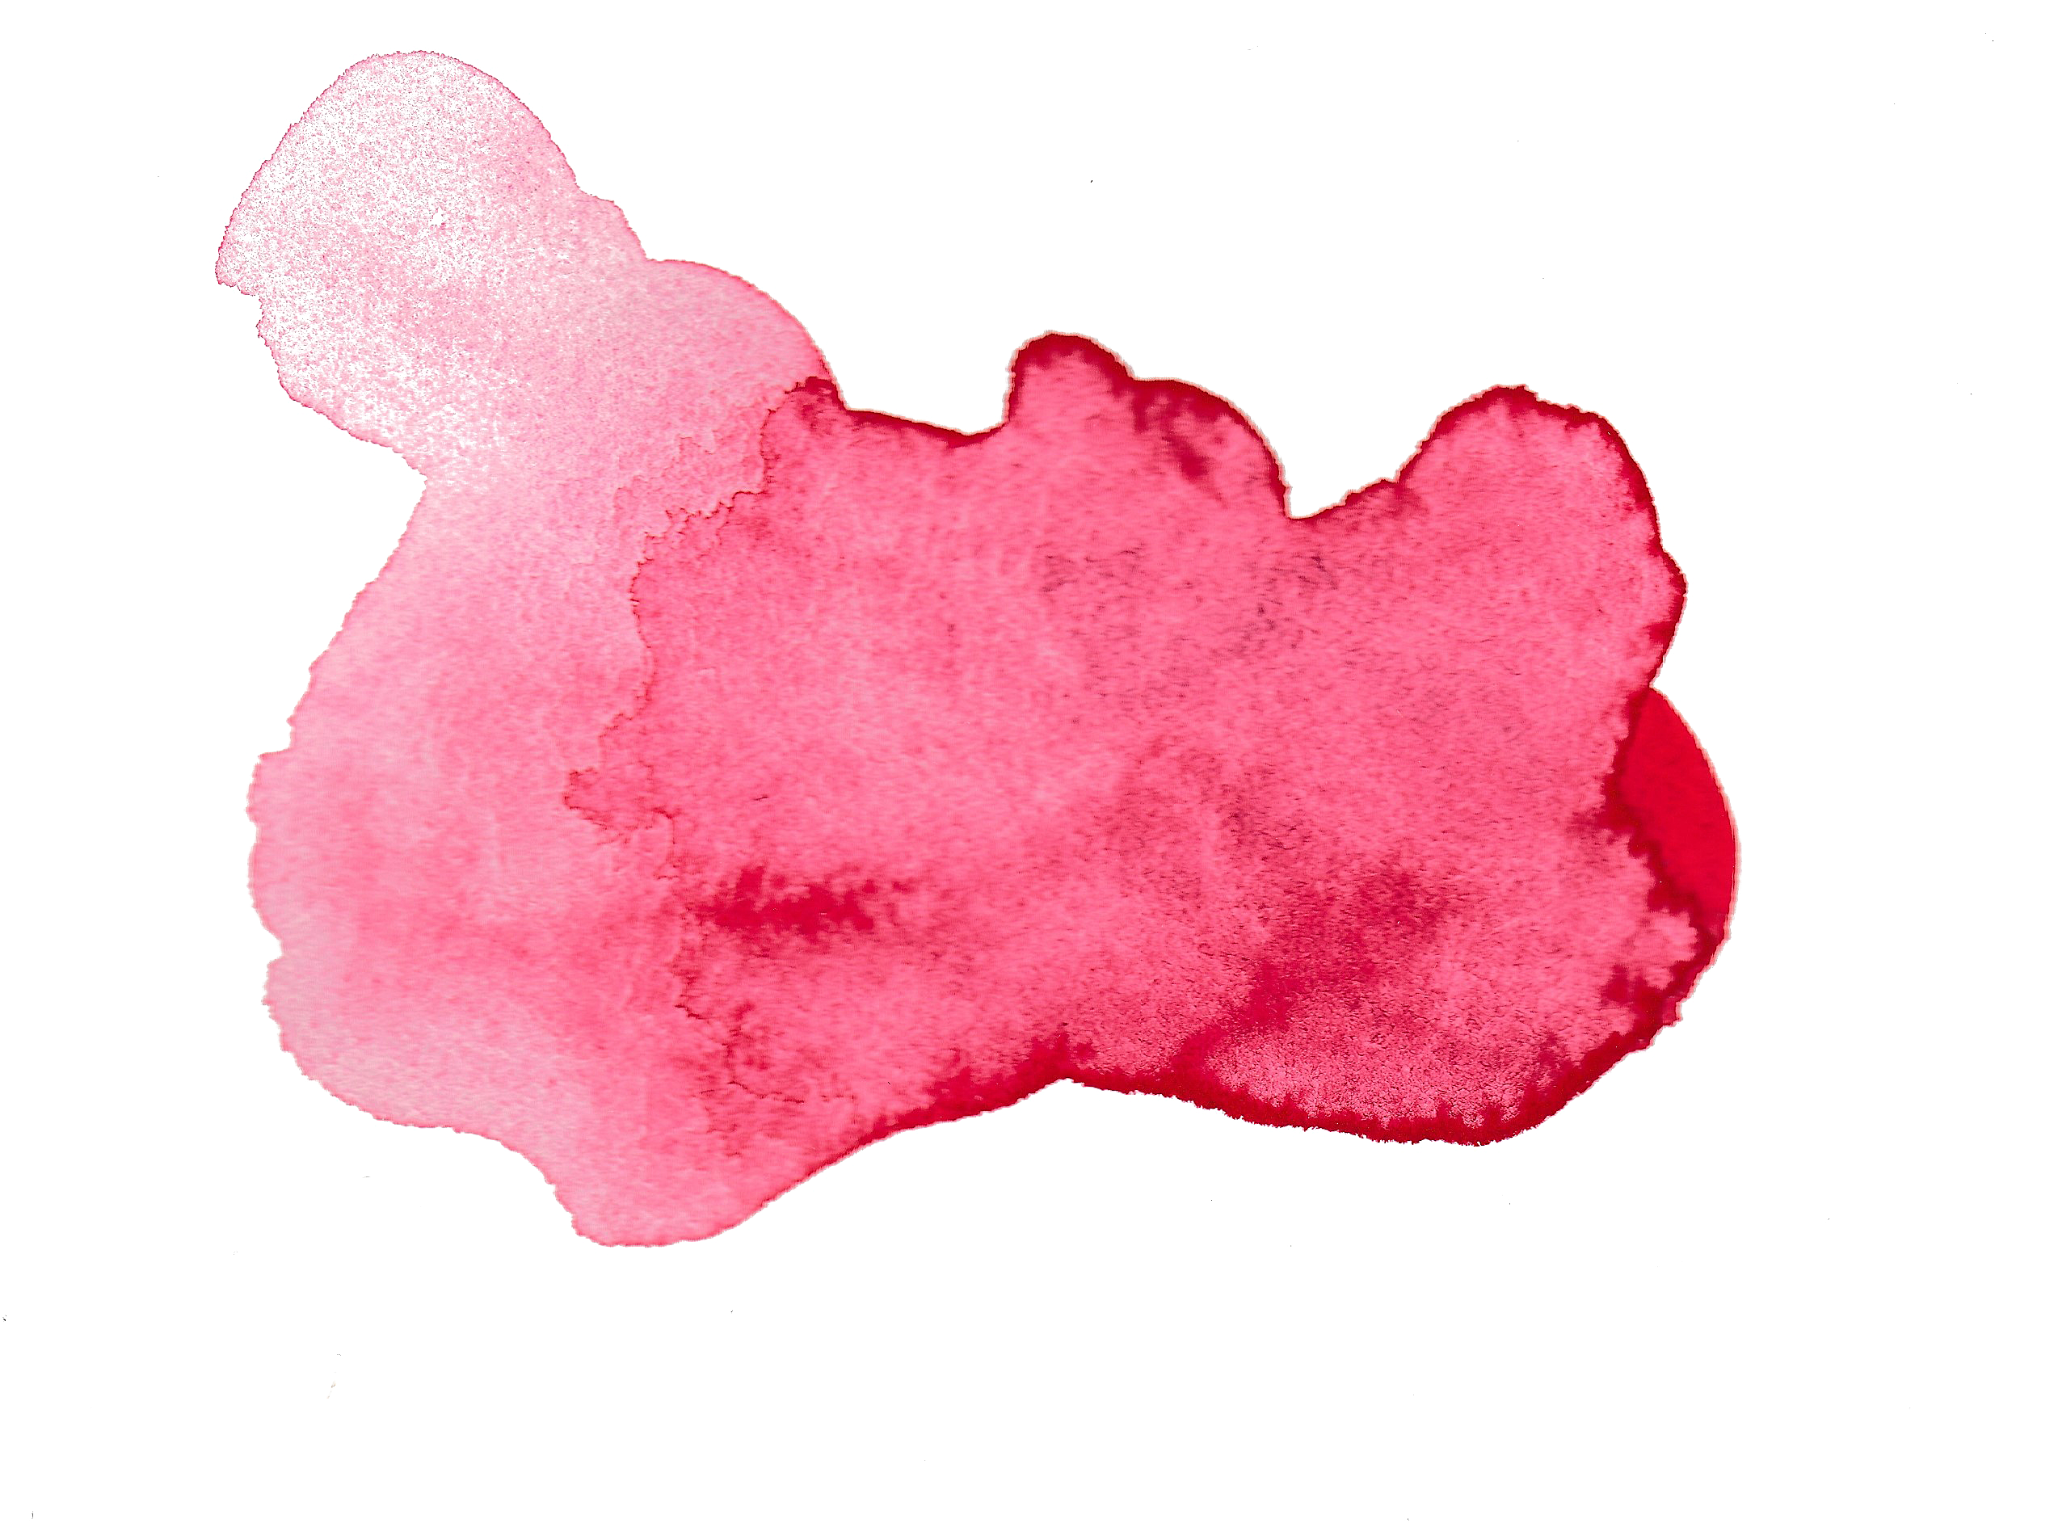 pink watercolor splashes